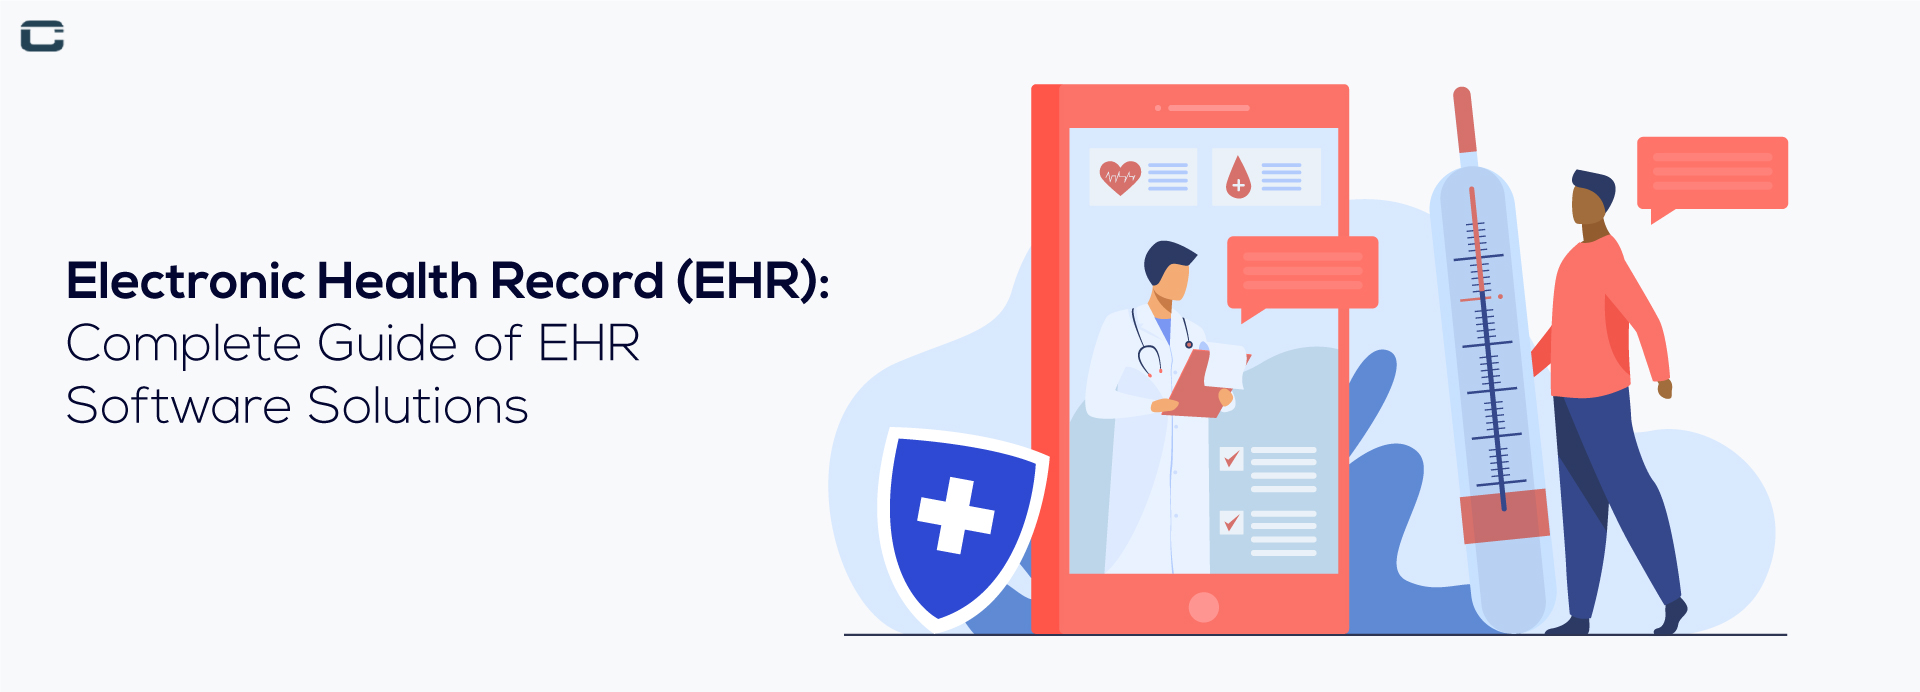 Electronic Health Record (EHR): Complete Guide to Create an EHR Software Solutions